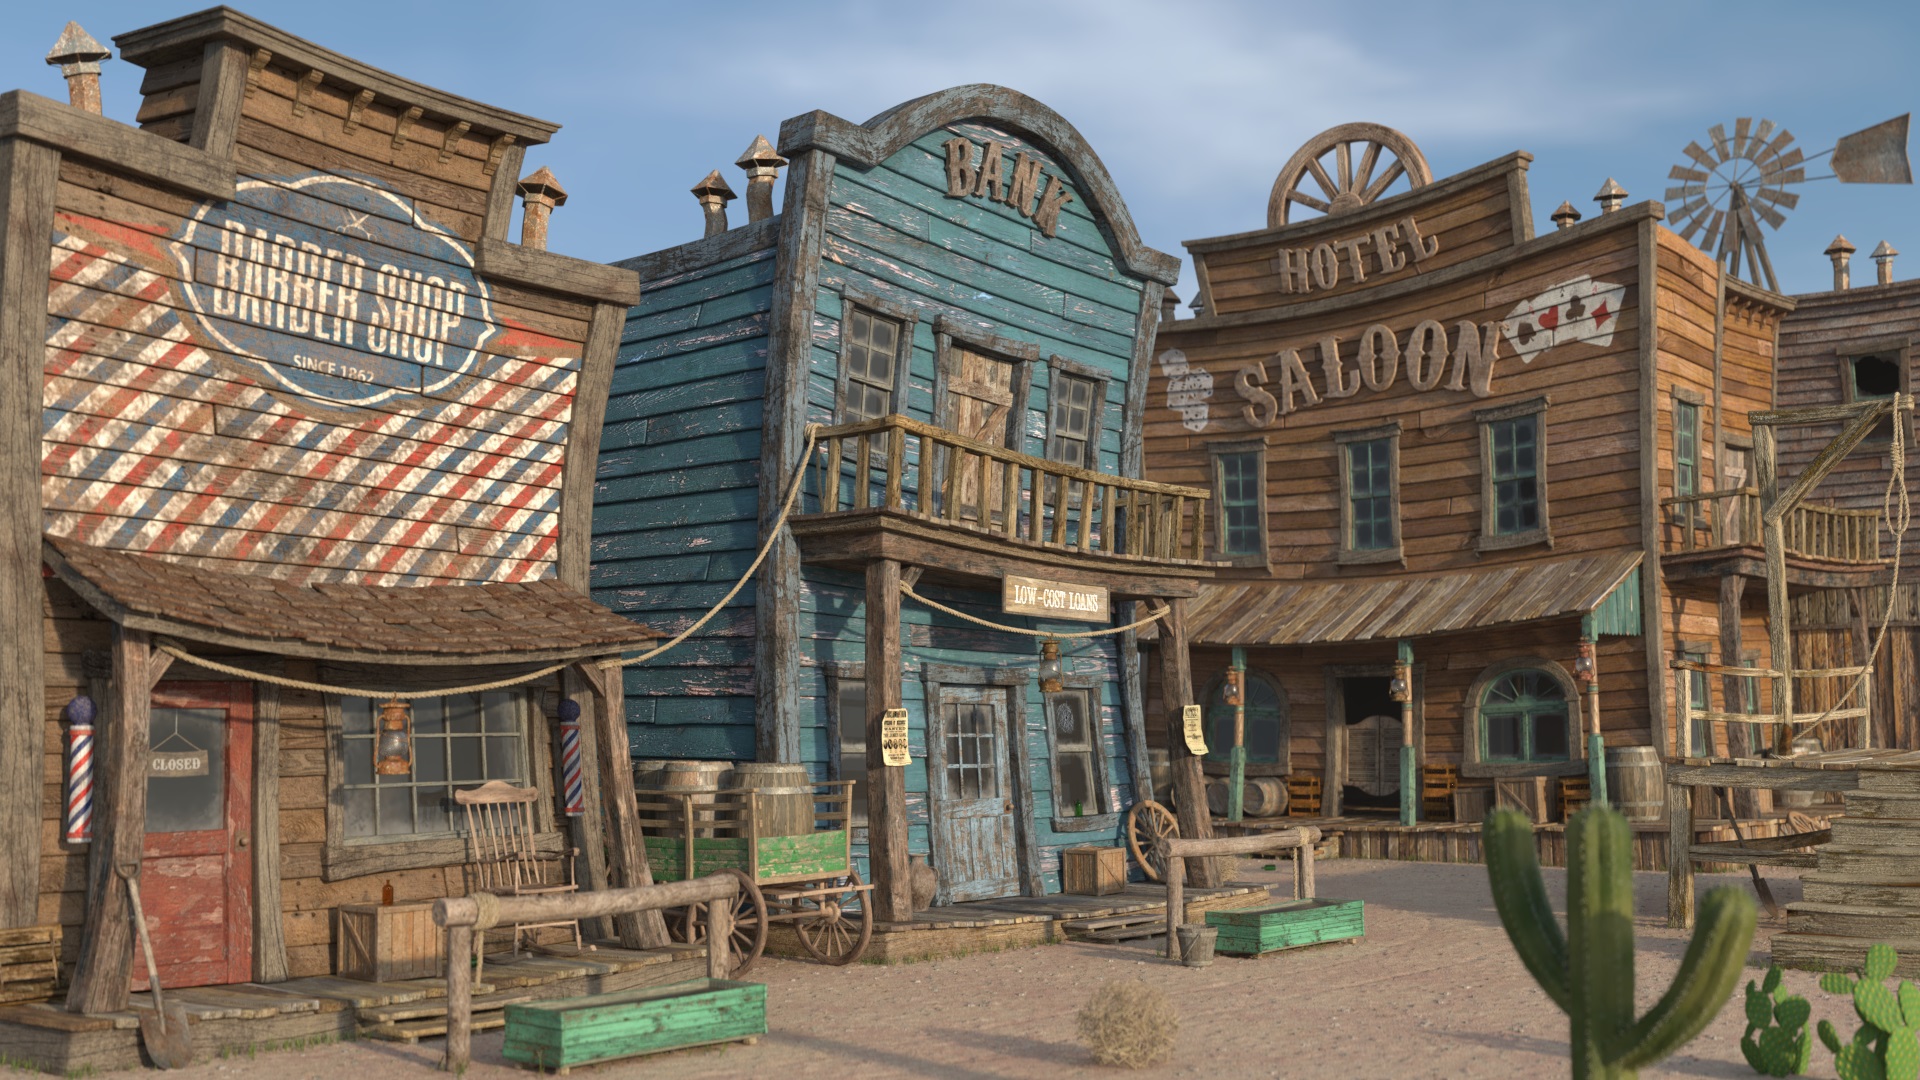 Wild West Cartoon - Finished Projects - Blender Artists Community